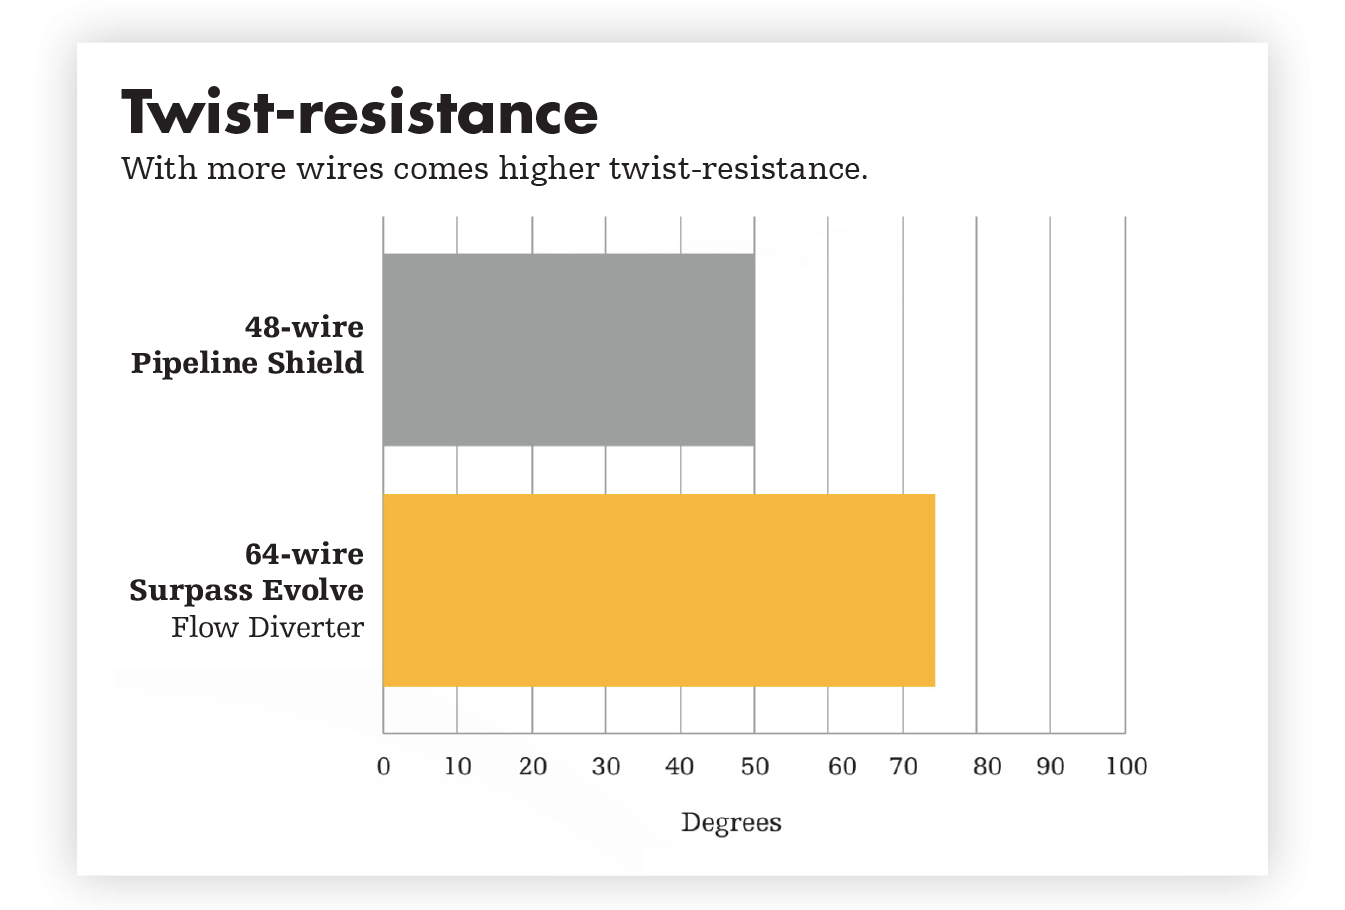 Twist-resistance: with more wires comes higher twist-resistance.